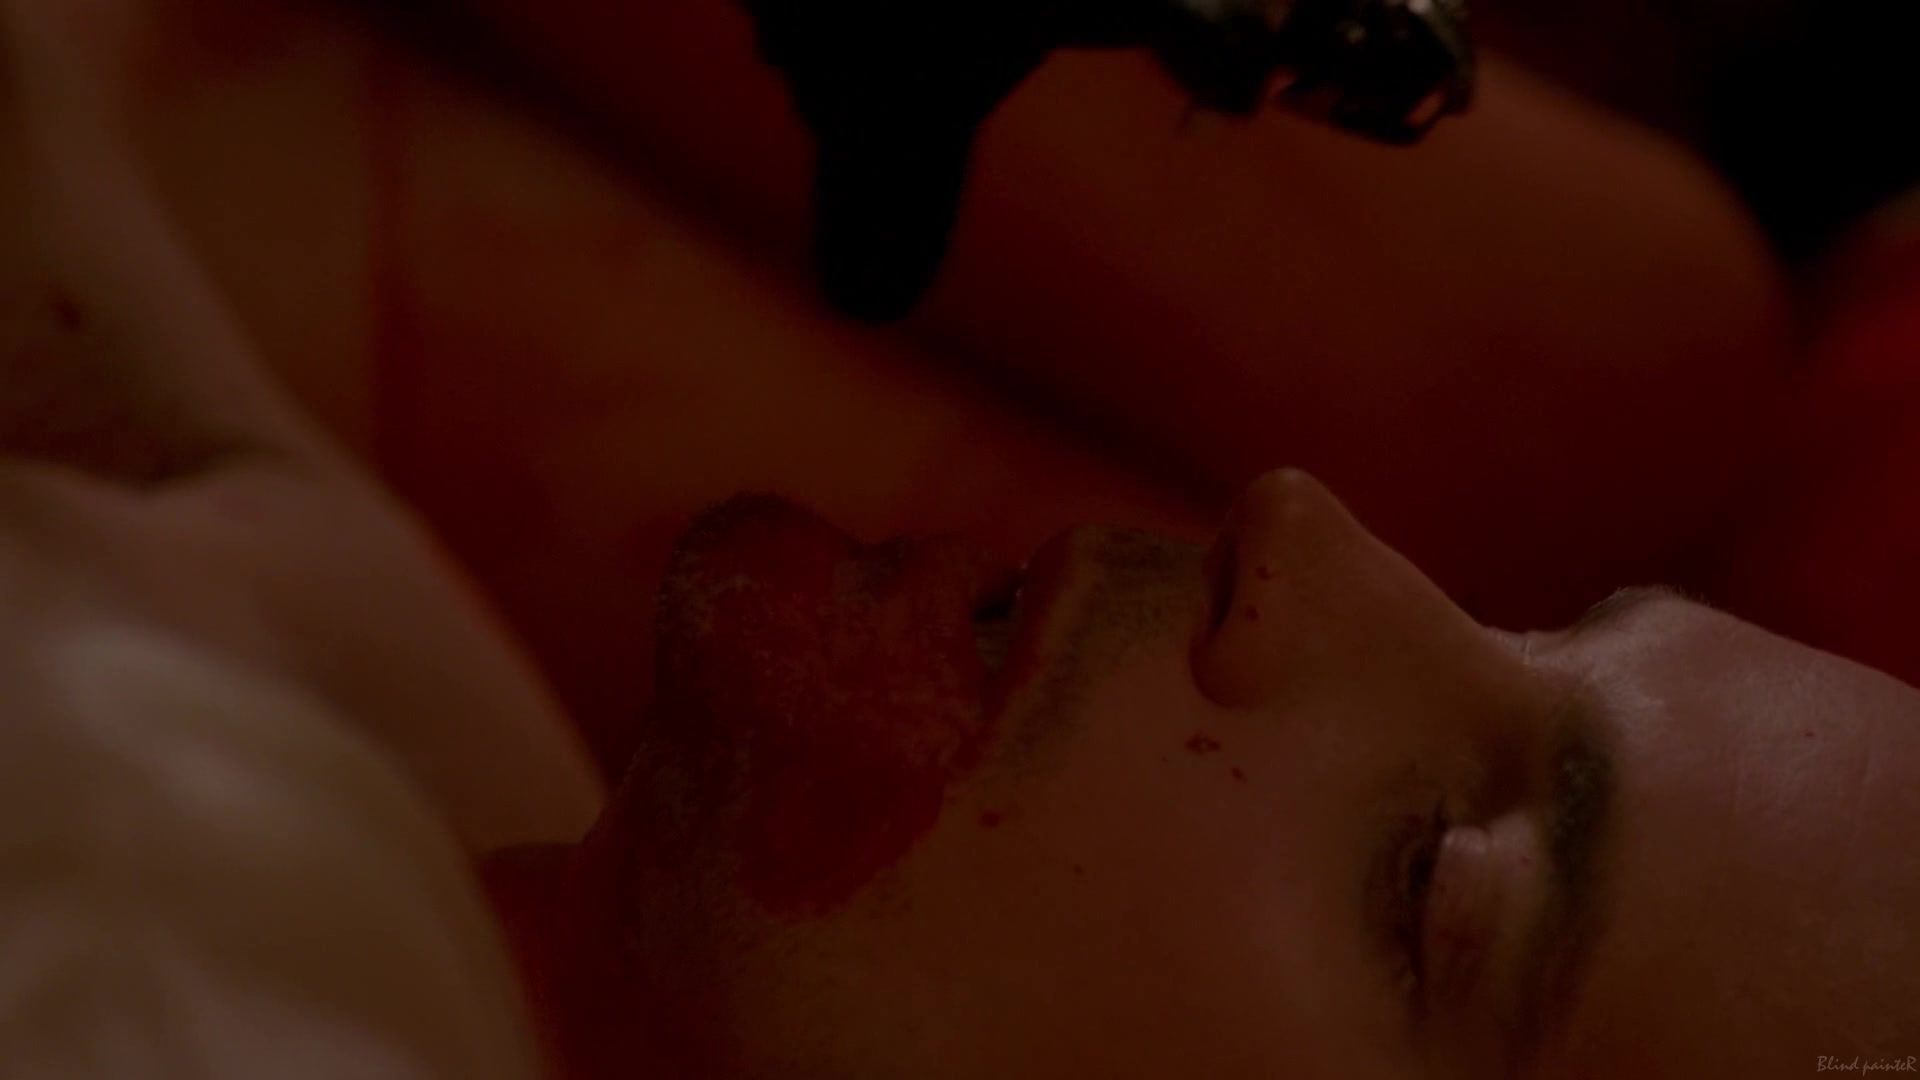 Colombian Lady Gaga & Chasty Ballesteros nude - American Horror Story S05E01 (2015) Sharing - 1